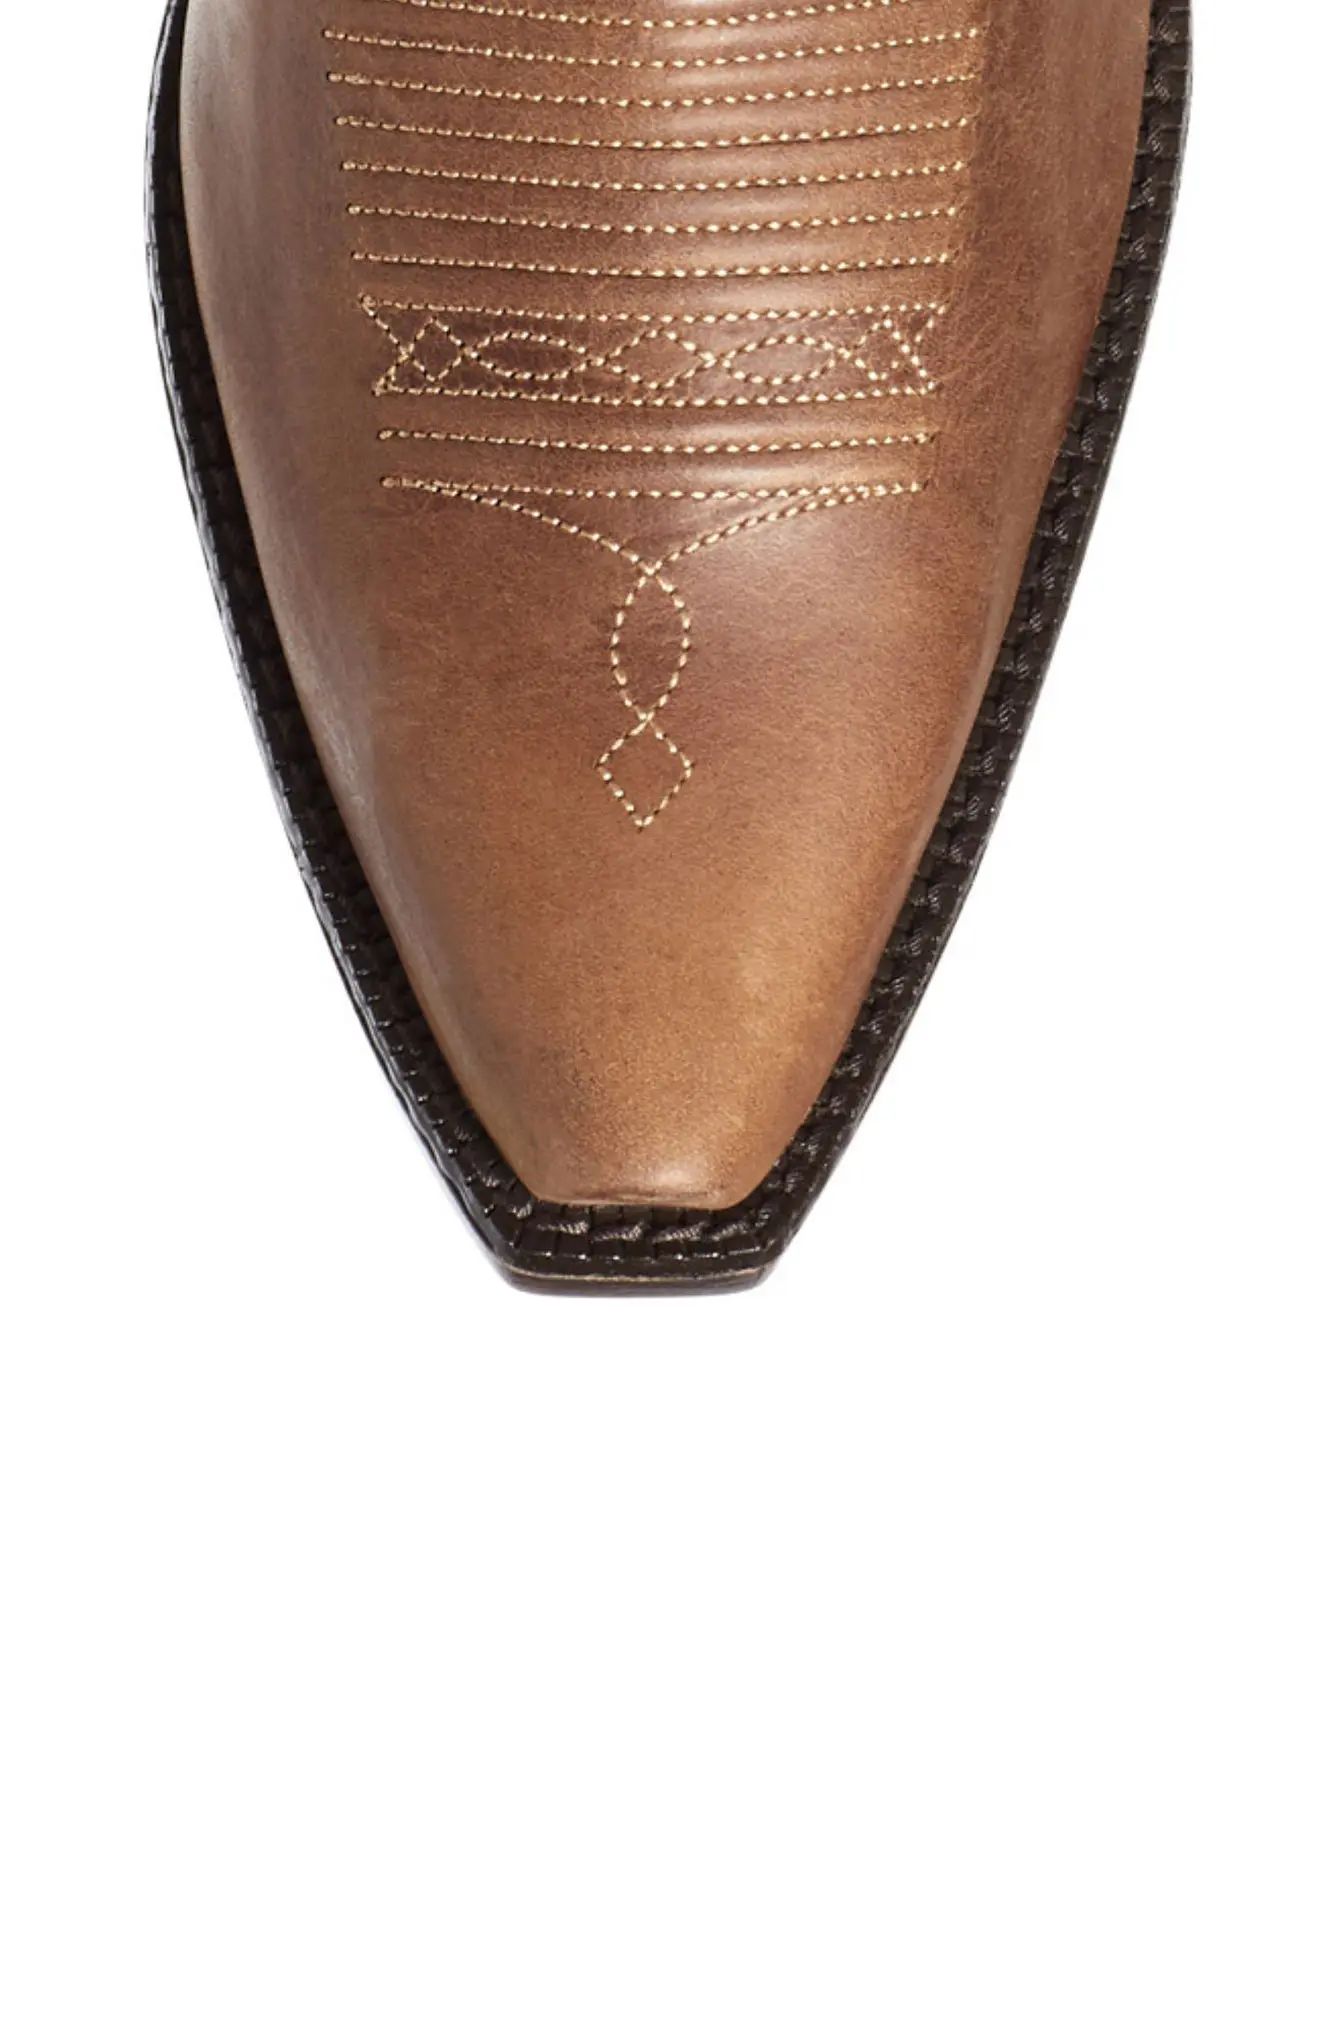 Women's Ariat Heritage X-Toe Western Boot, Size 7.5 B - Brown | Nordstrom